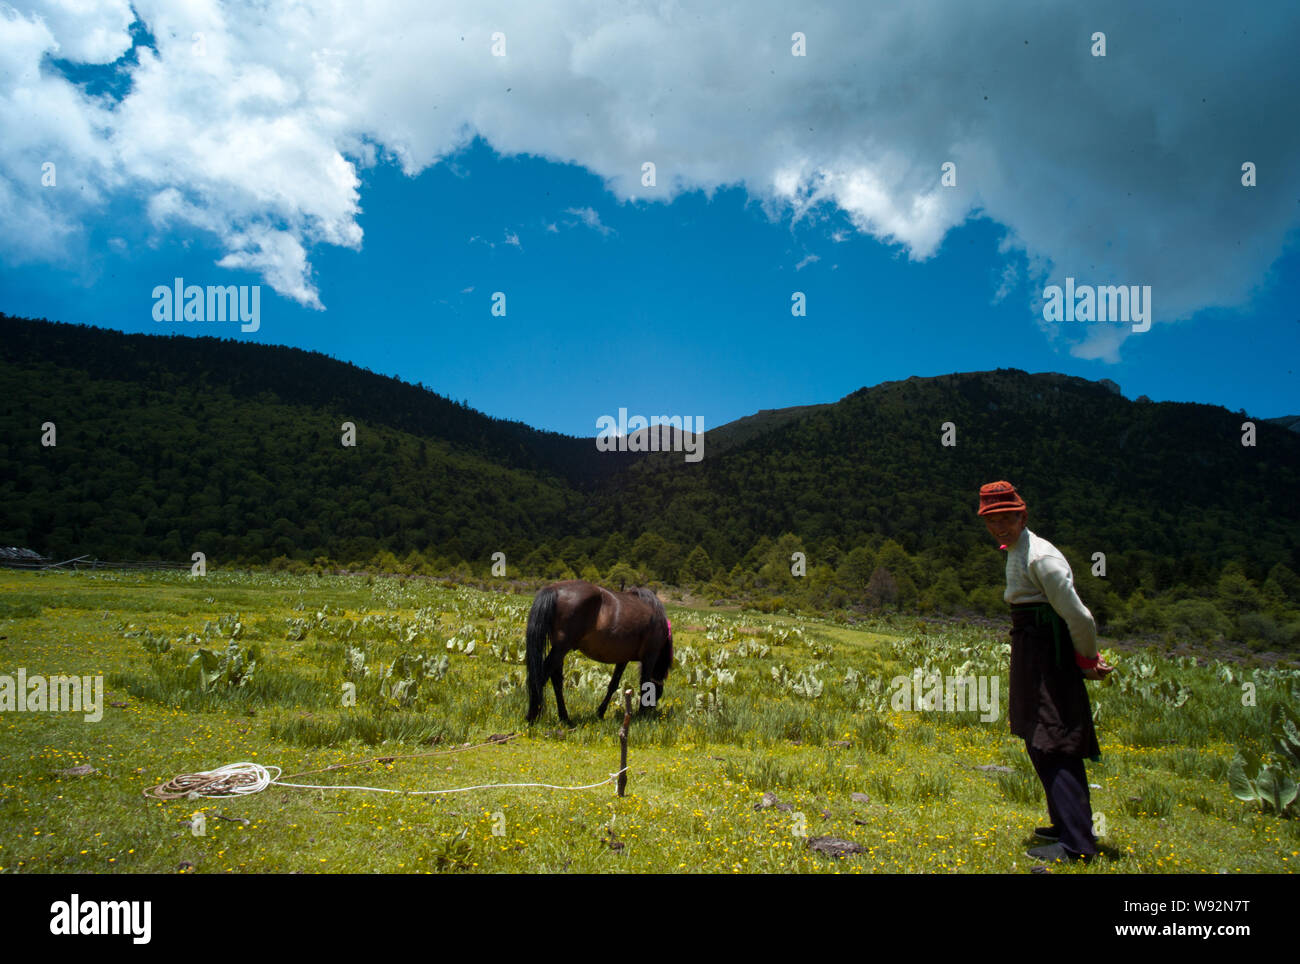 A horse grazes in the grass land in Shangri-la, southwest Chinas Yunnan Province, 11 June 2013.   Shangri-La is a fictional place described in the 193 Stock Photo